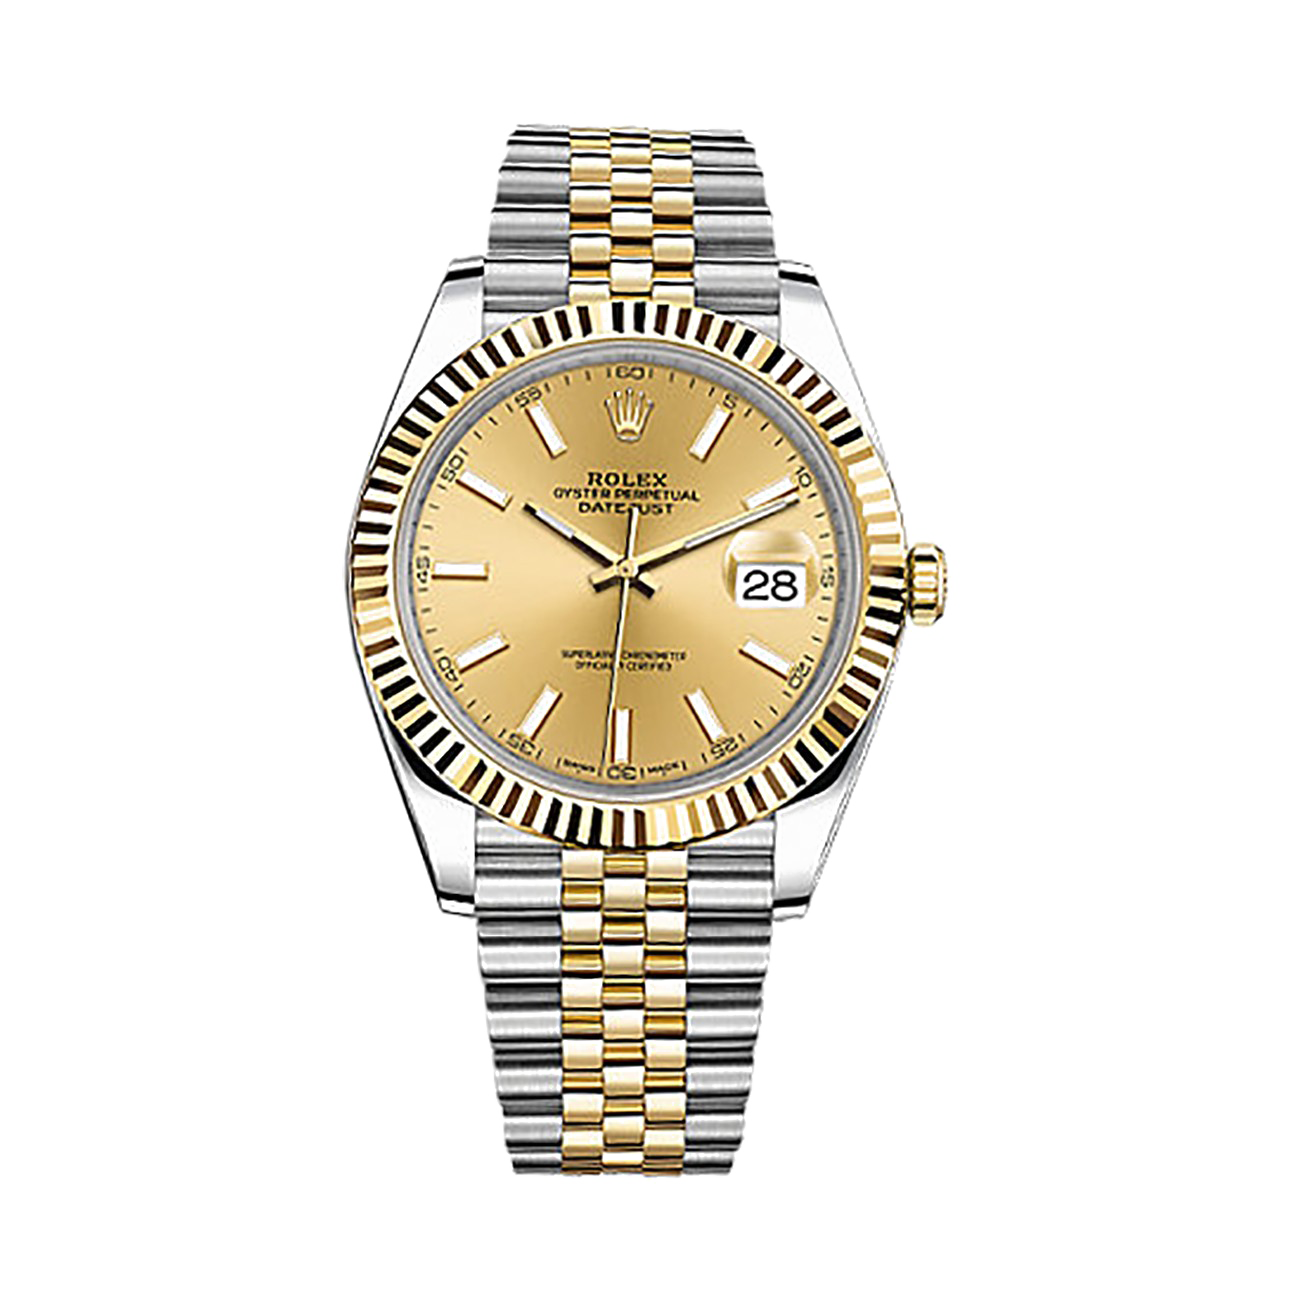 Rolex PNG Image Background